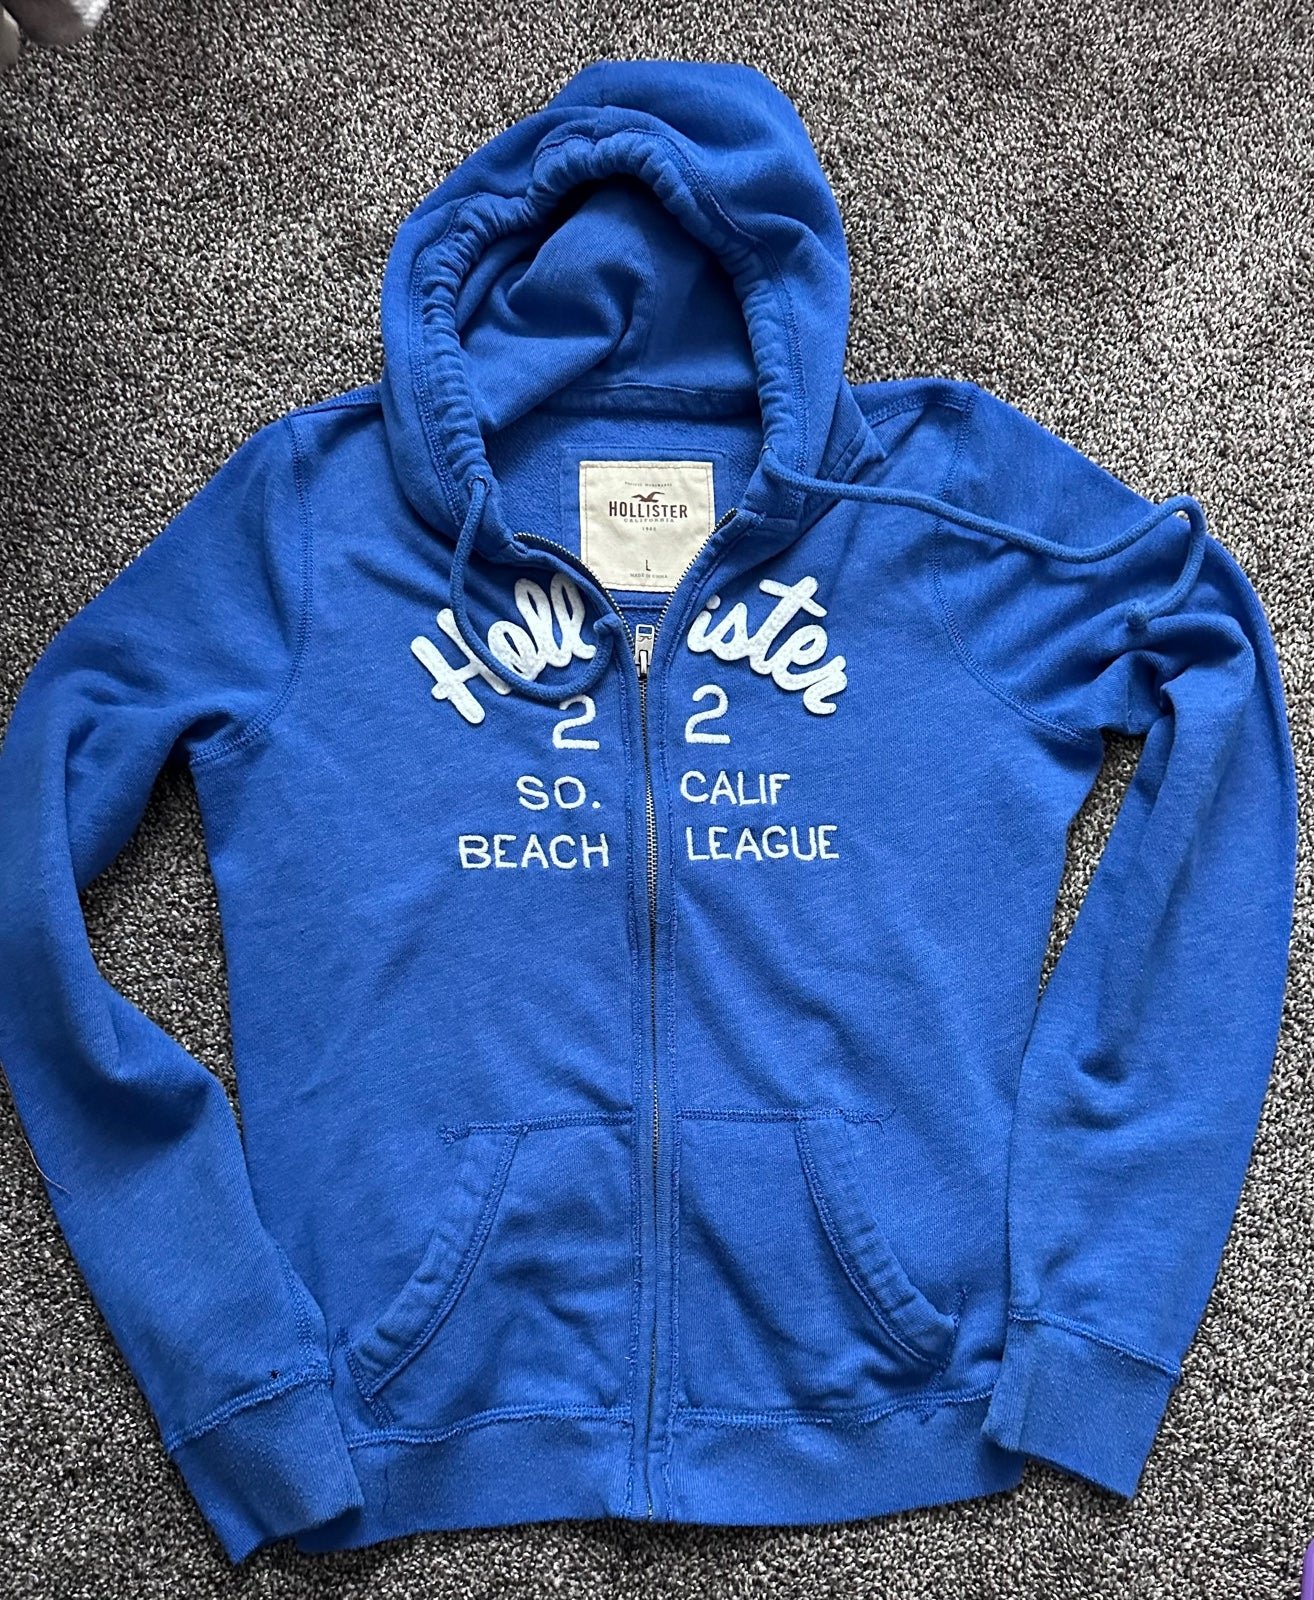 high discount Hollister Zip Hoodie HyV7udjSs all for yo